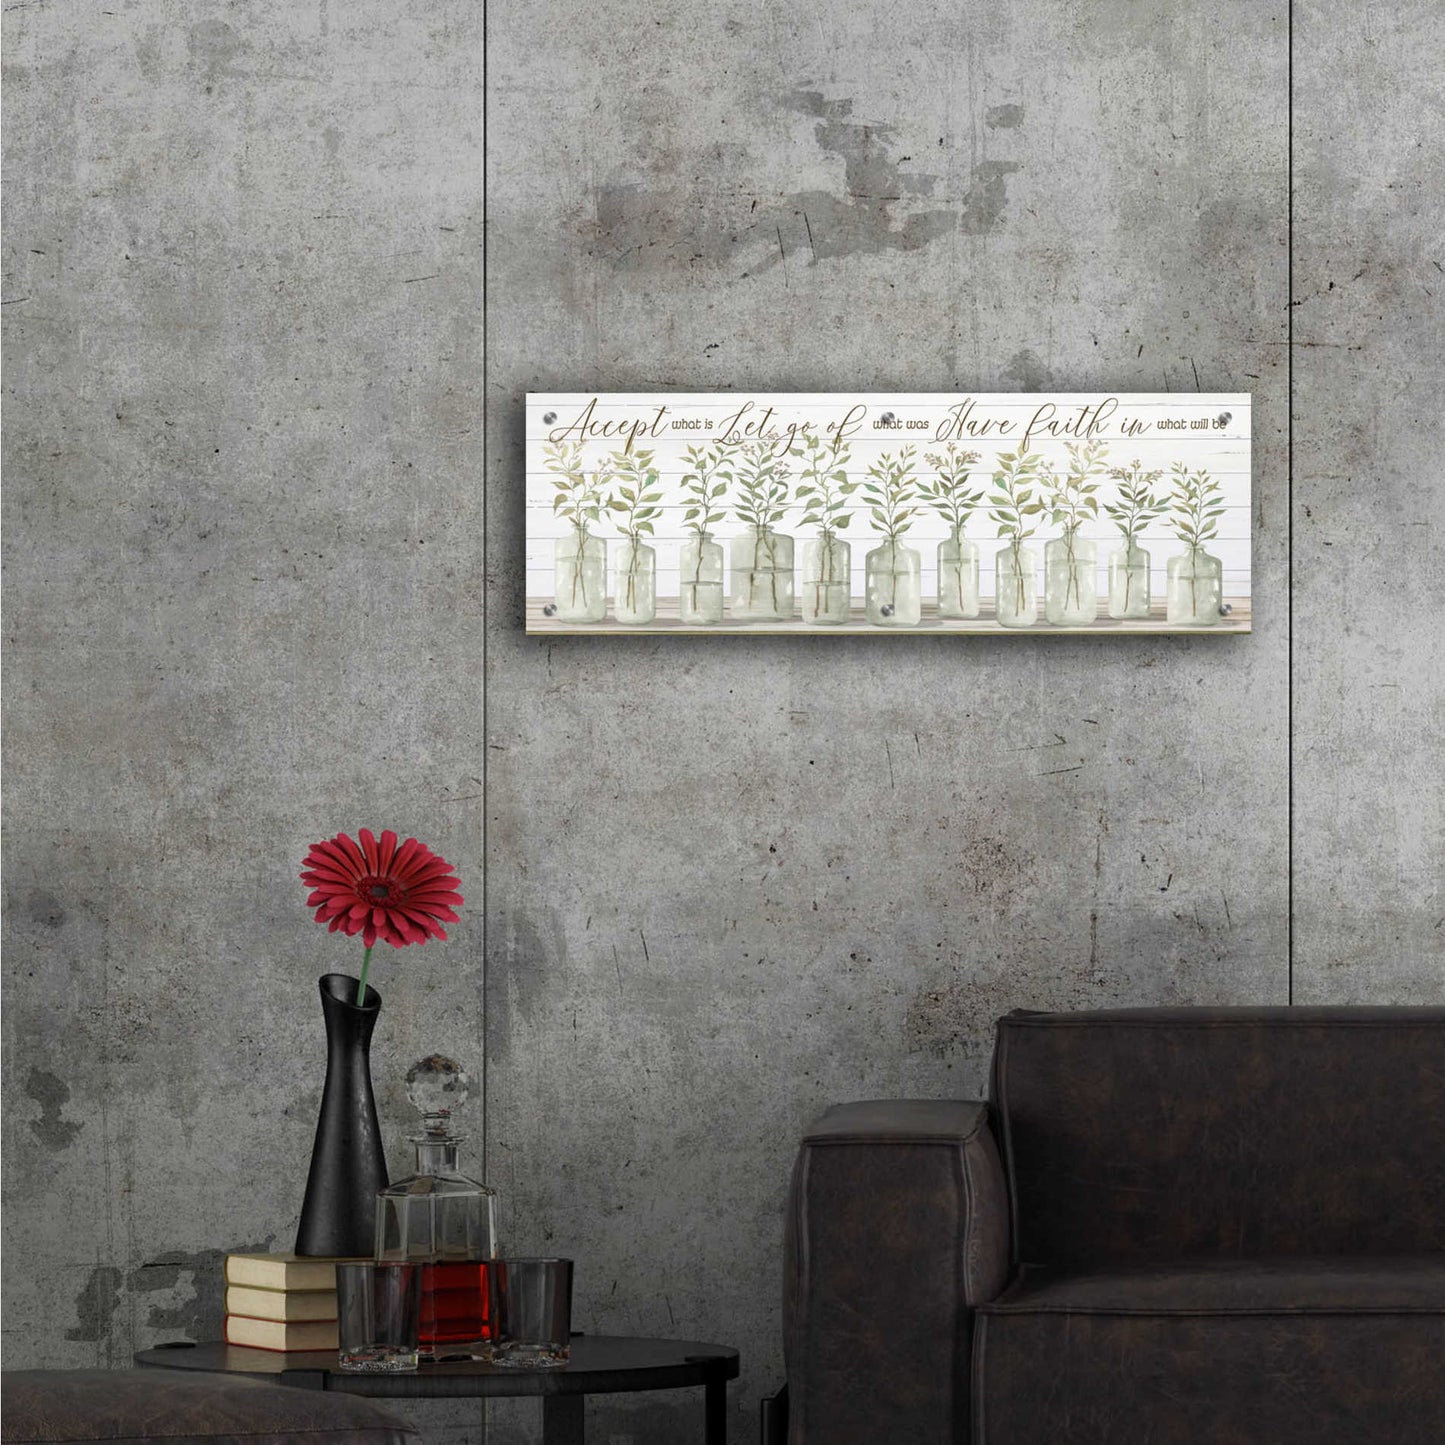 Epic Art 'Accept What Is' by Cindy Jacobs, Acrylic Glass Wall Art,36x12